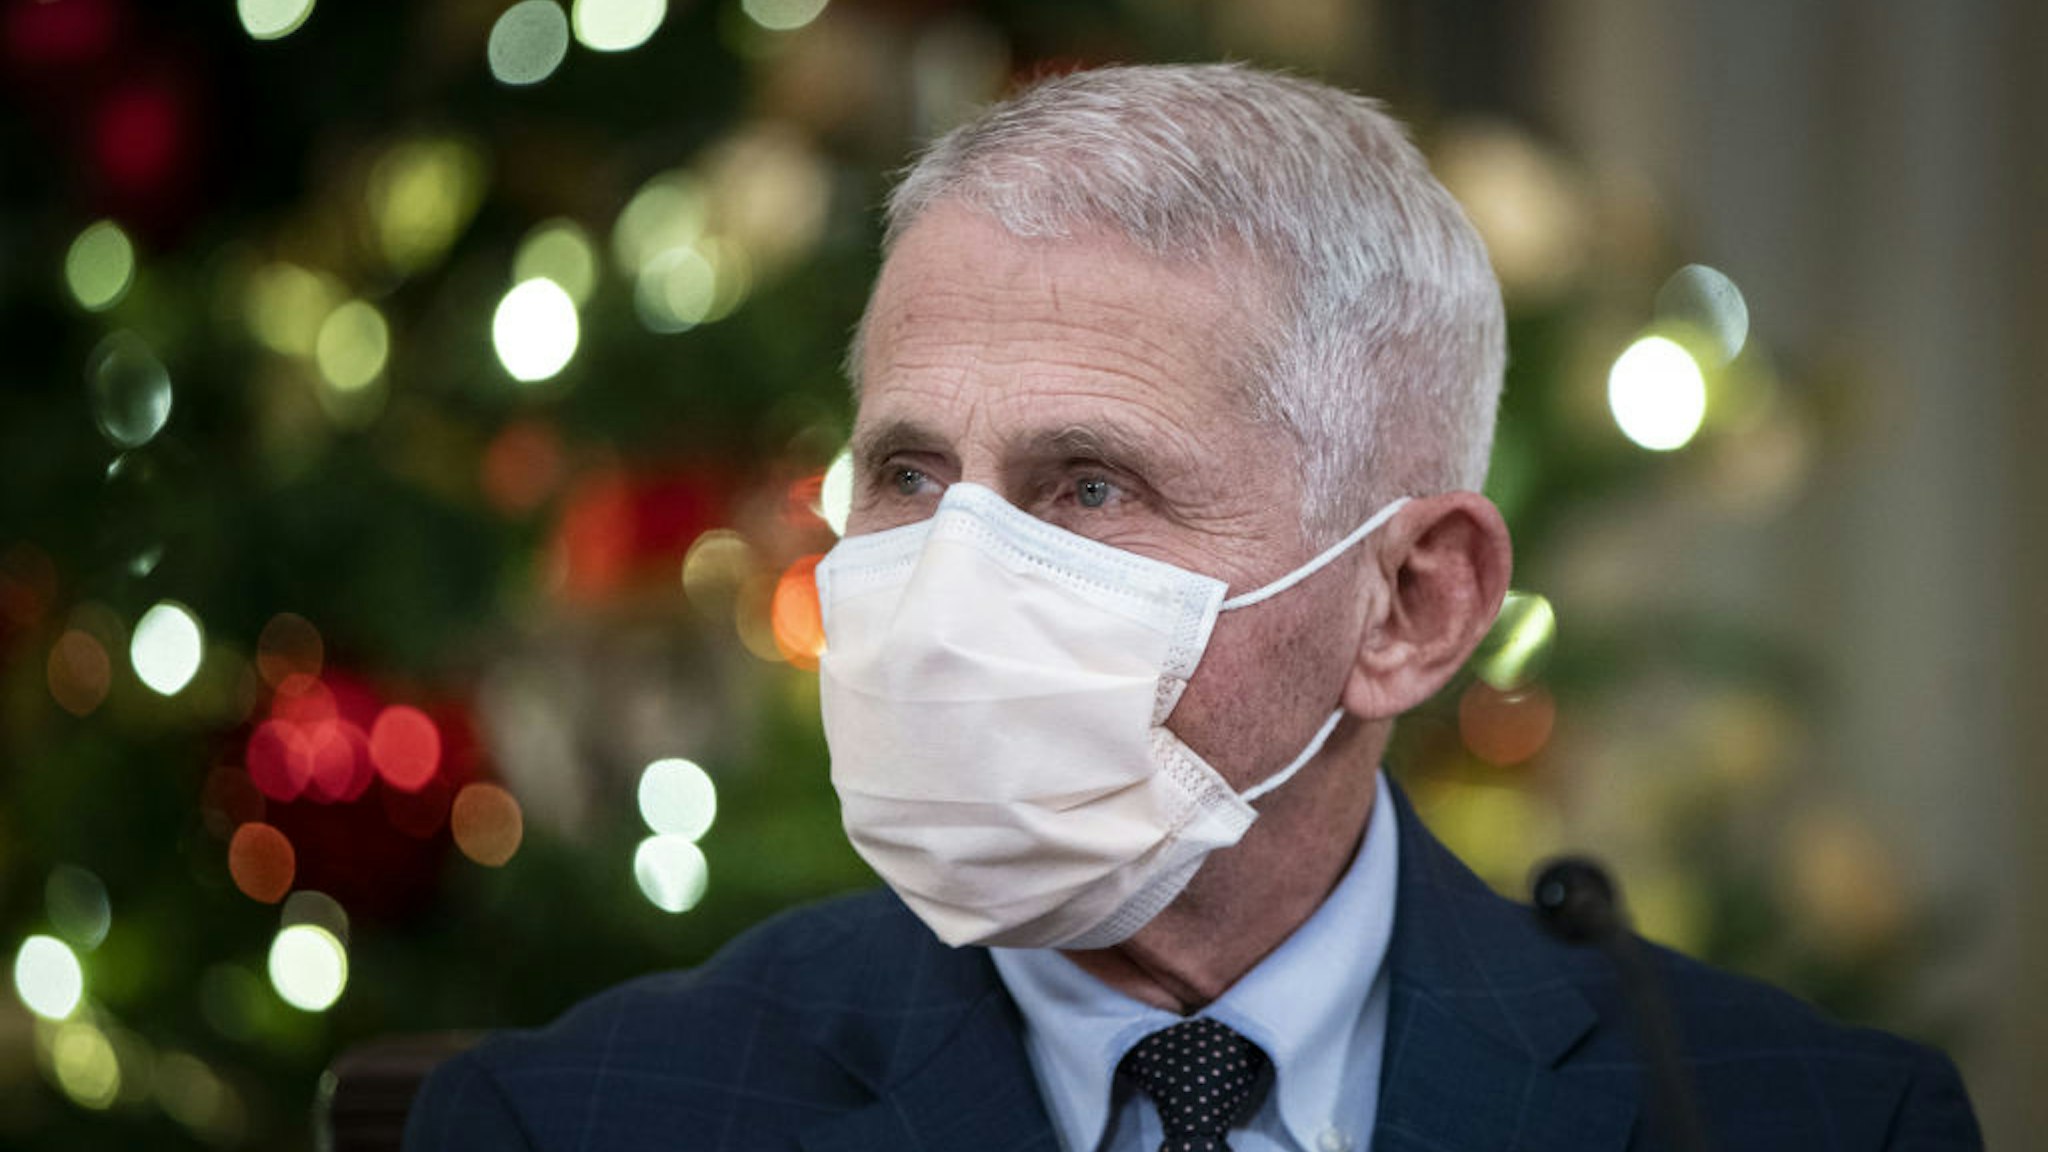 Anthony Fauci, director of the National Institute of Allergy and Infectious Diseases, during a meeting with U.S. President Joe Biden and members of the White House Covid-19 Response Team on the Omicron variant in the State Dining Room of the White House in Washington, D.C., U.S., on Thursday, Dec. 9, 2021. Covid-19 hospital admissions are rising quickly in many parts of the eastern U.S., including New Jersey and Connecticut, two weeks after U.S. residents gathered for the Thanksgiving holiday.